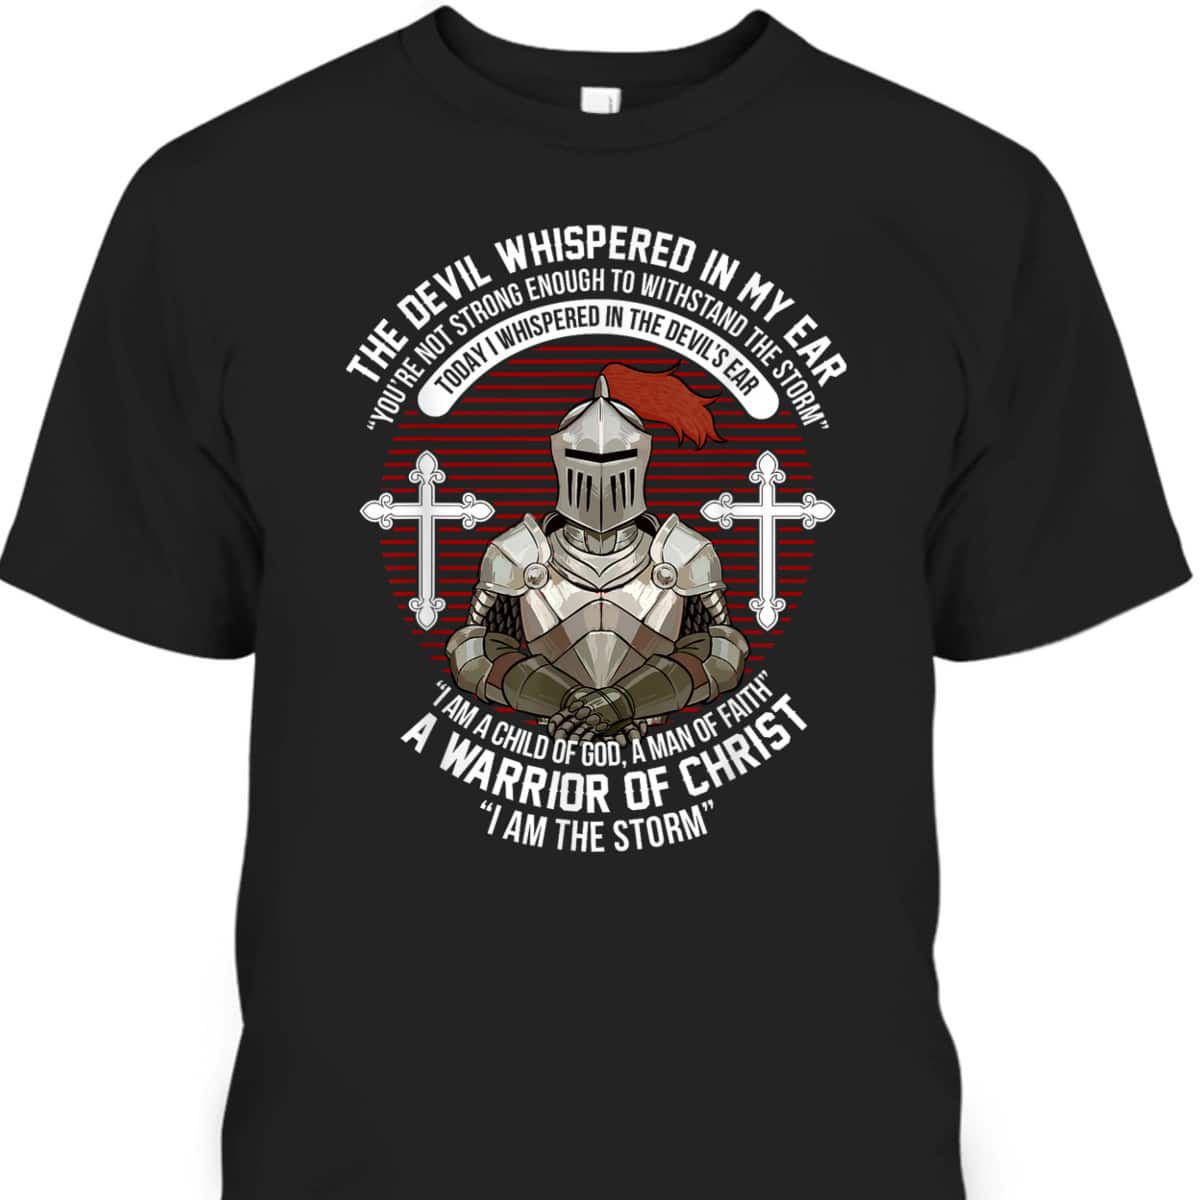 The Devil Whispered In My Ear Warrior Of Christ I Am The Storm Knight Christian T-Shirt